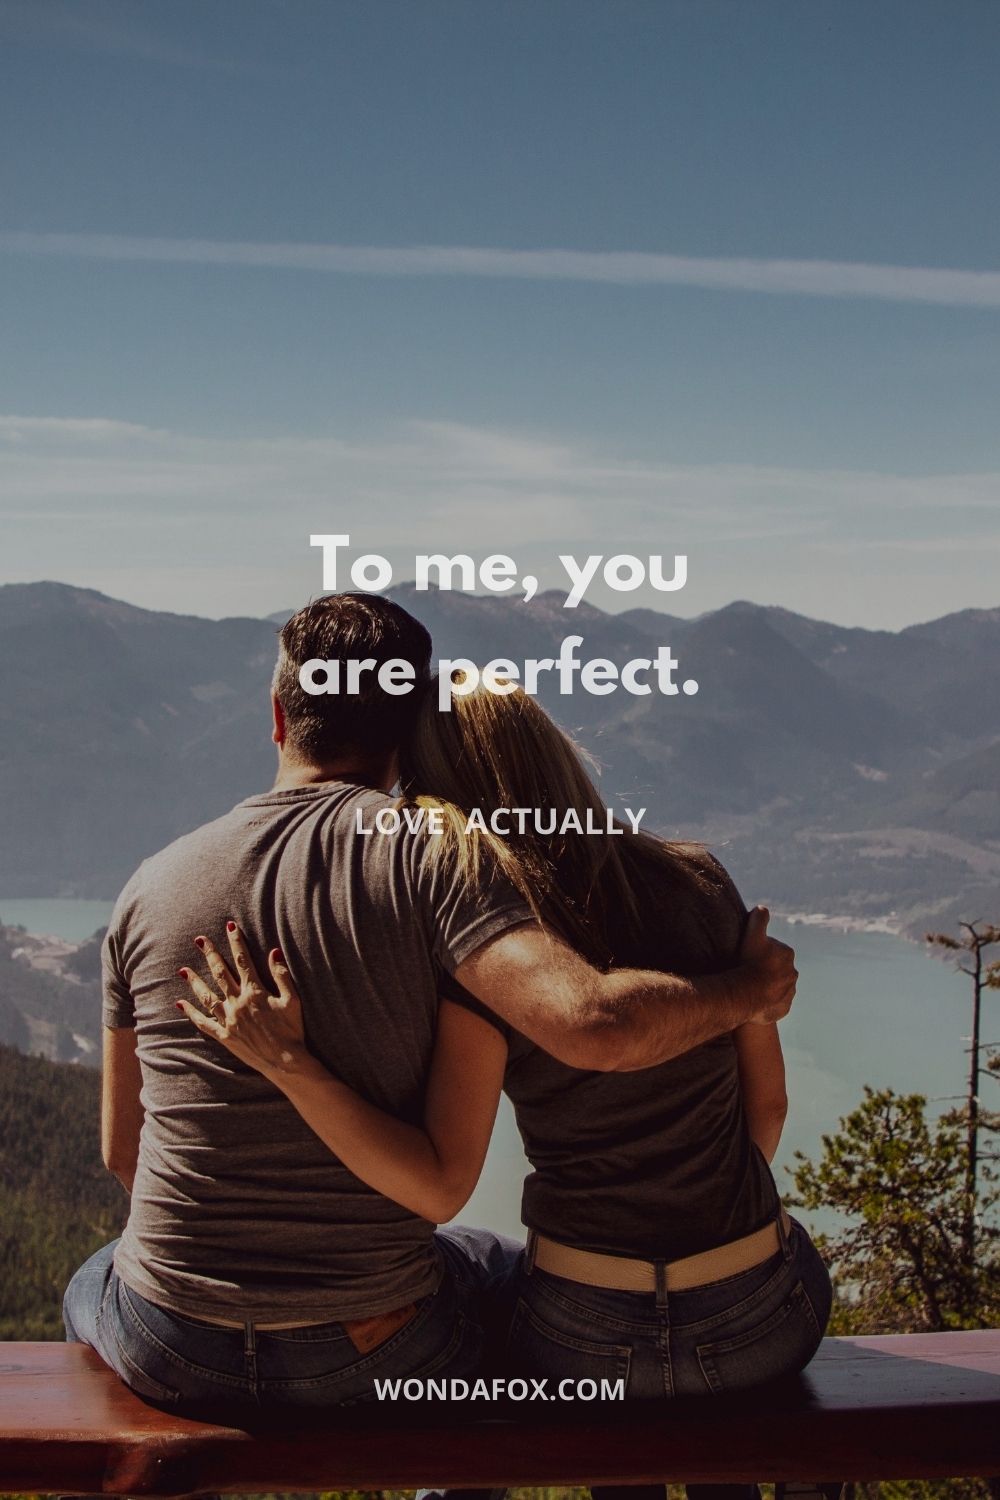 To me, you are perfect.